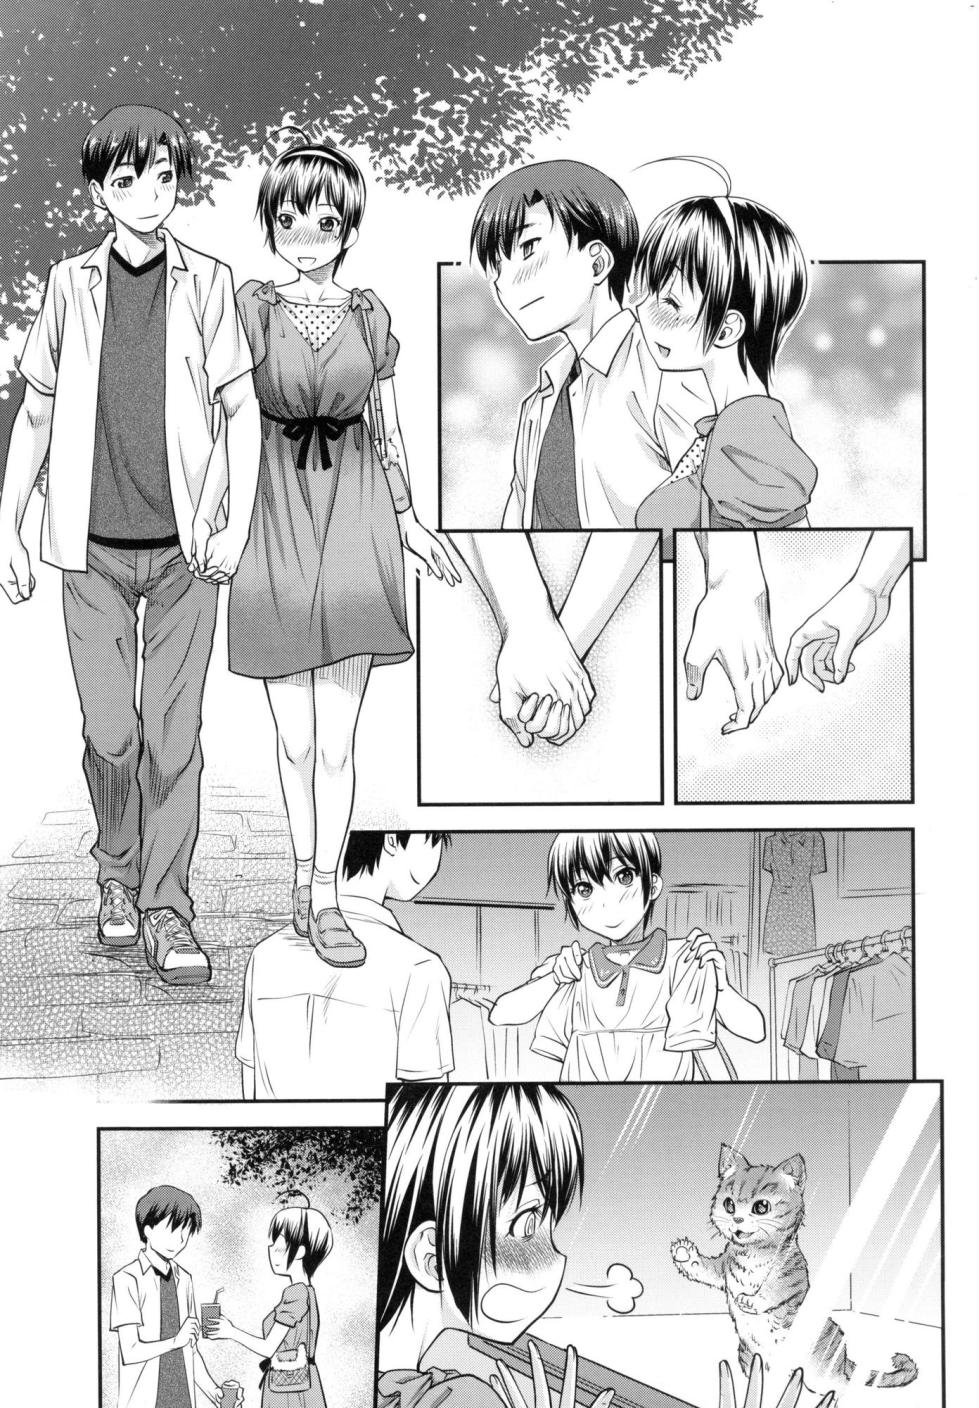 [Nagare Ippon] Kaname Date Jou | 小要開發Date 上 [Chinese] [Decensored] - Page 36